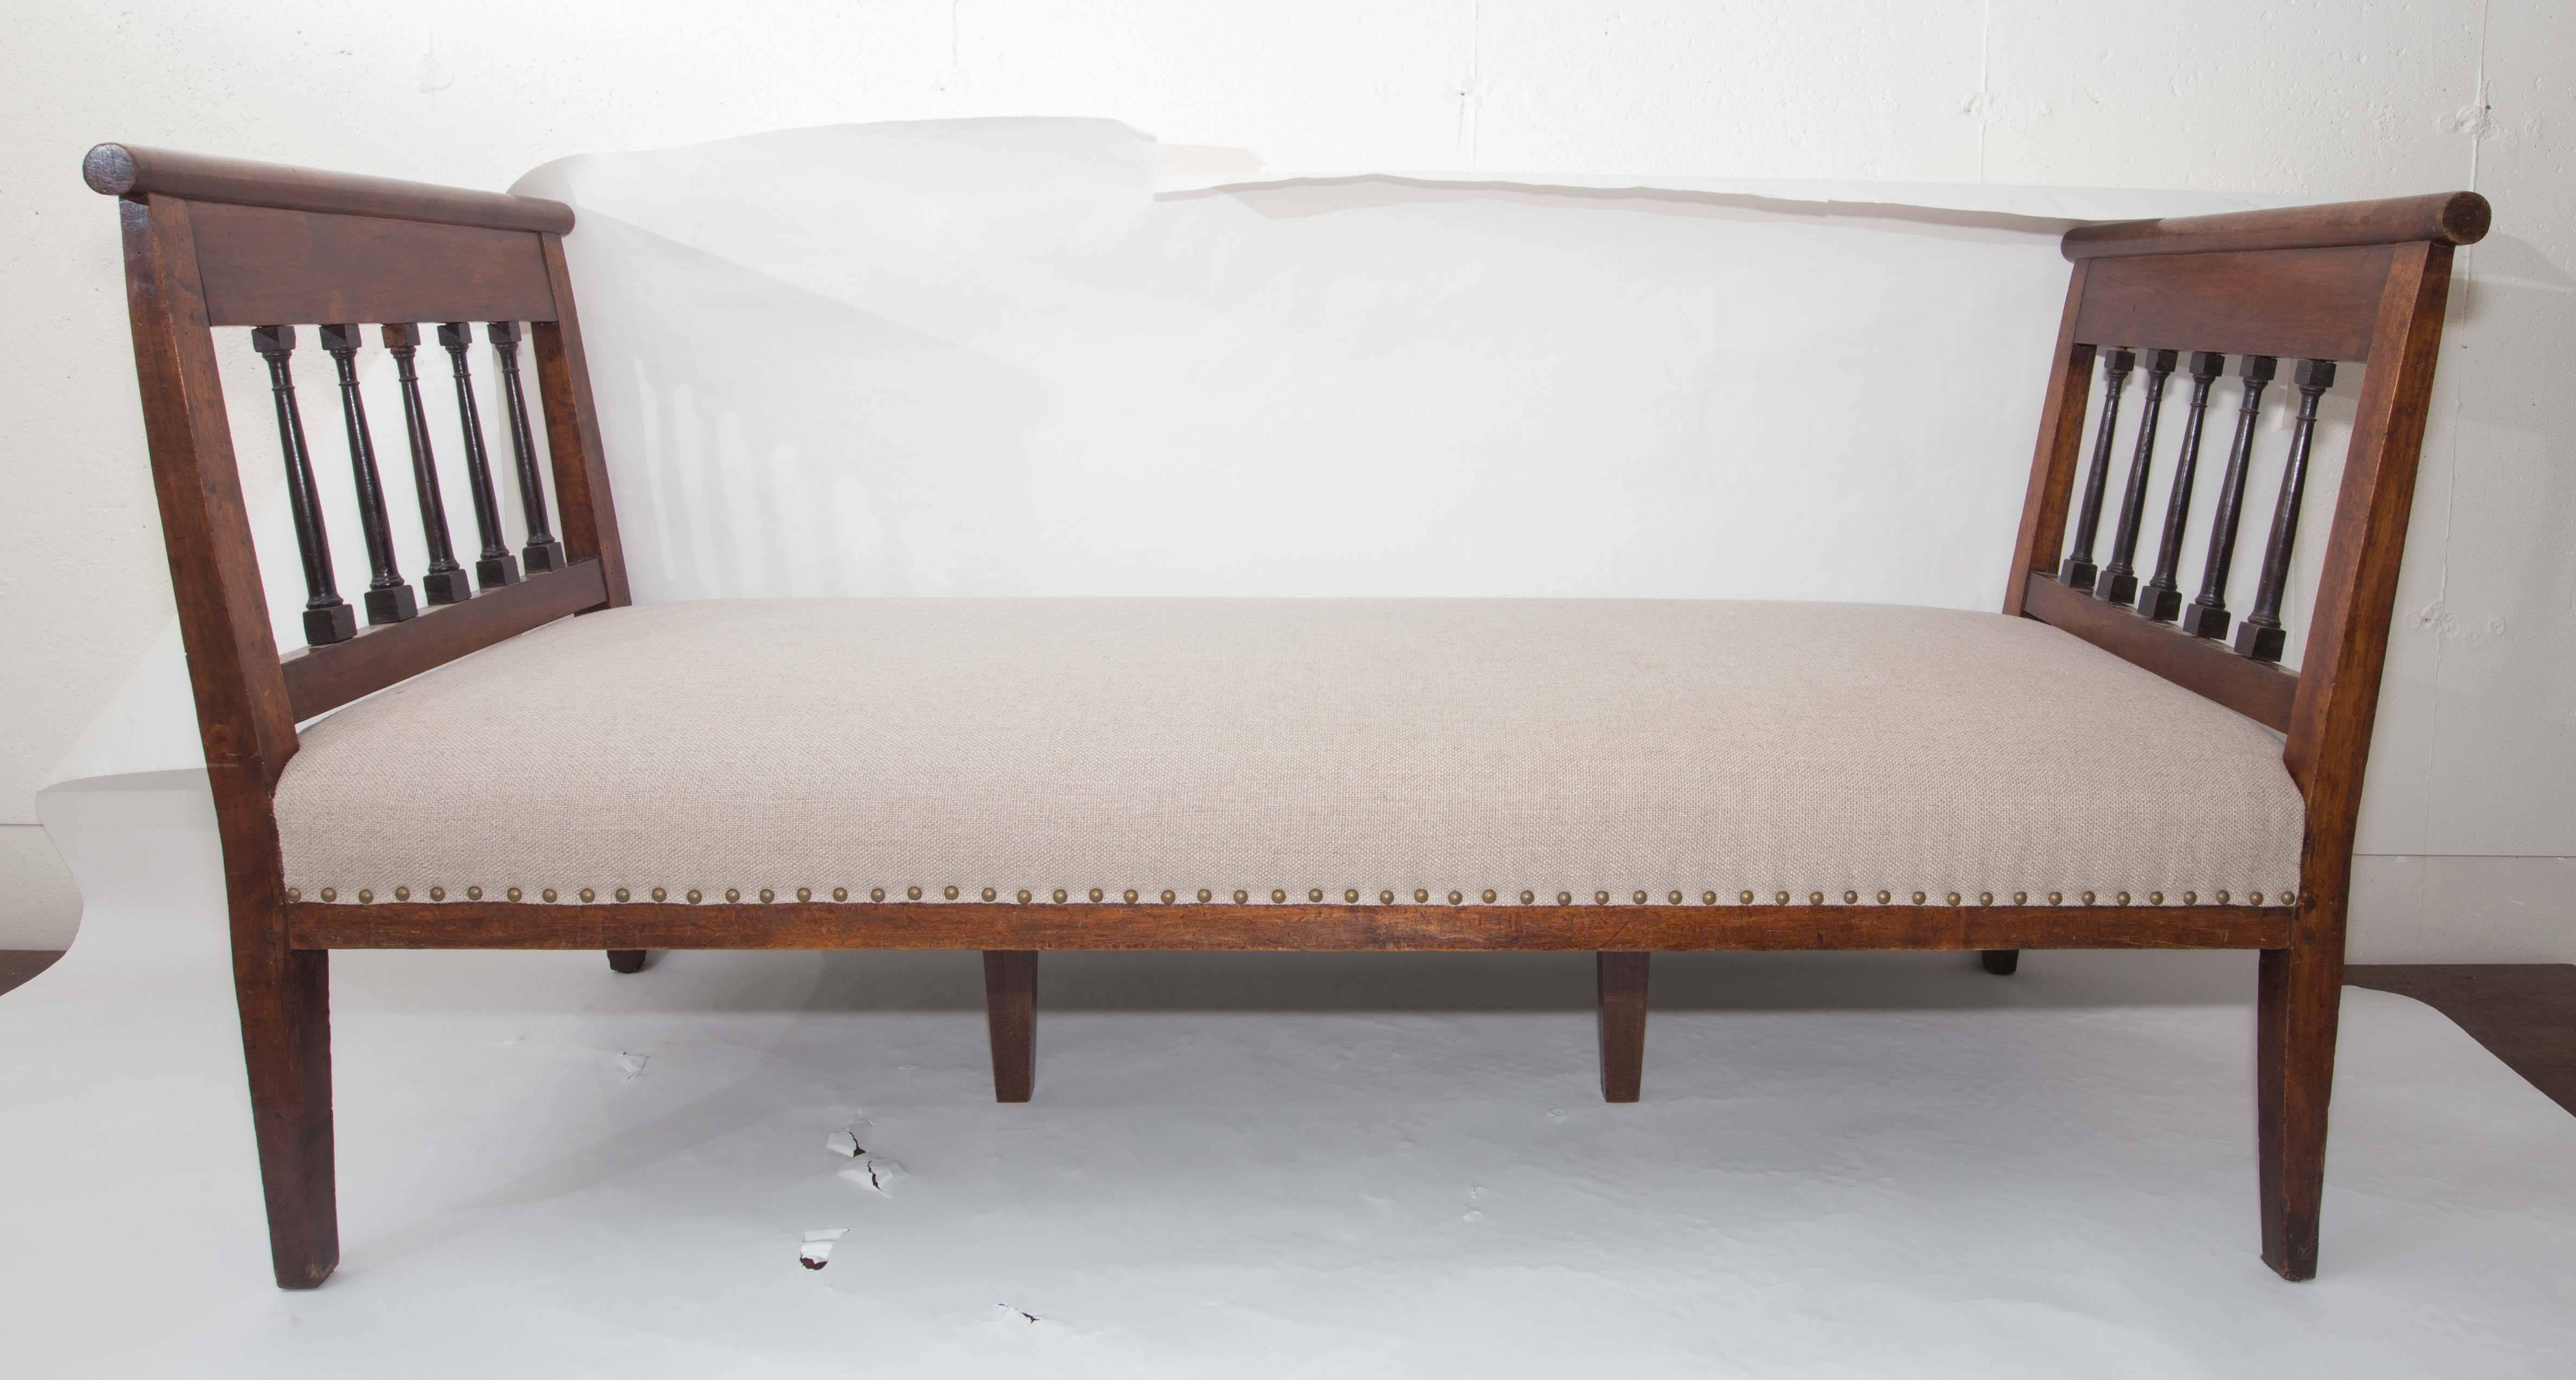 Large walnut bench with upholstered linen seat.